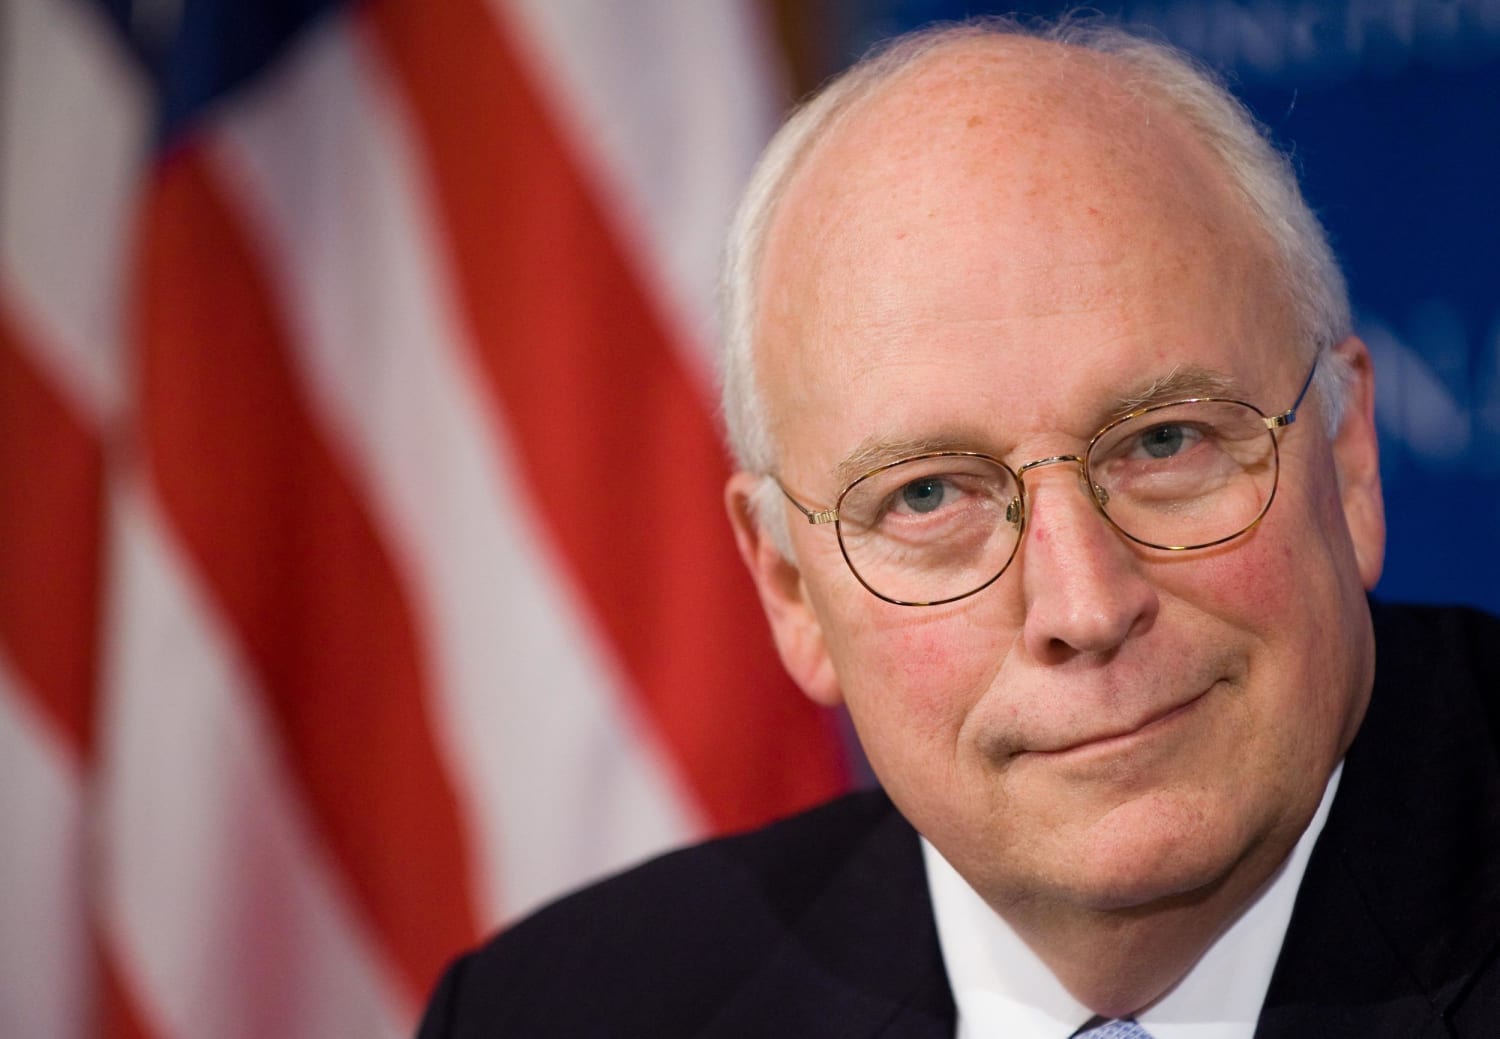 Dick cheney takes over